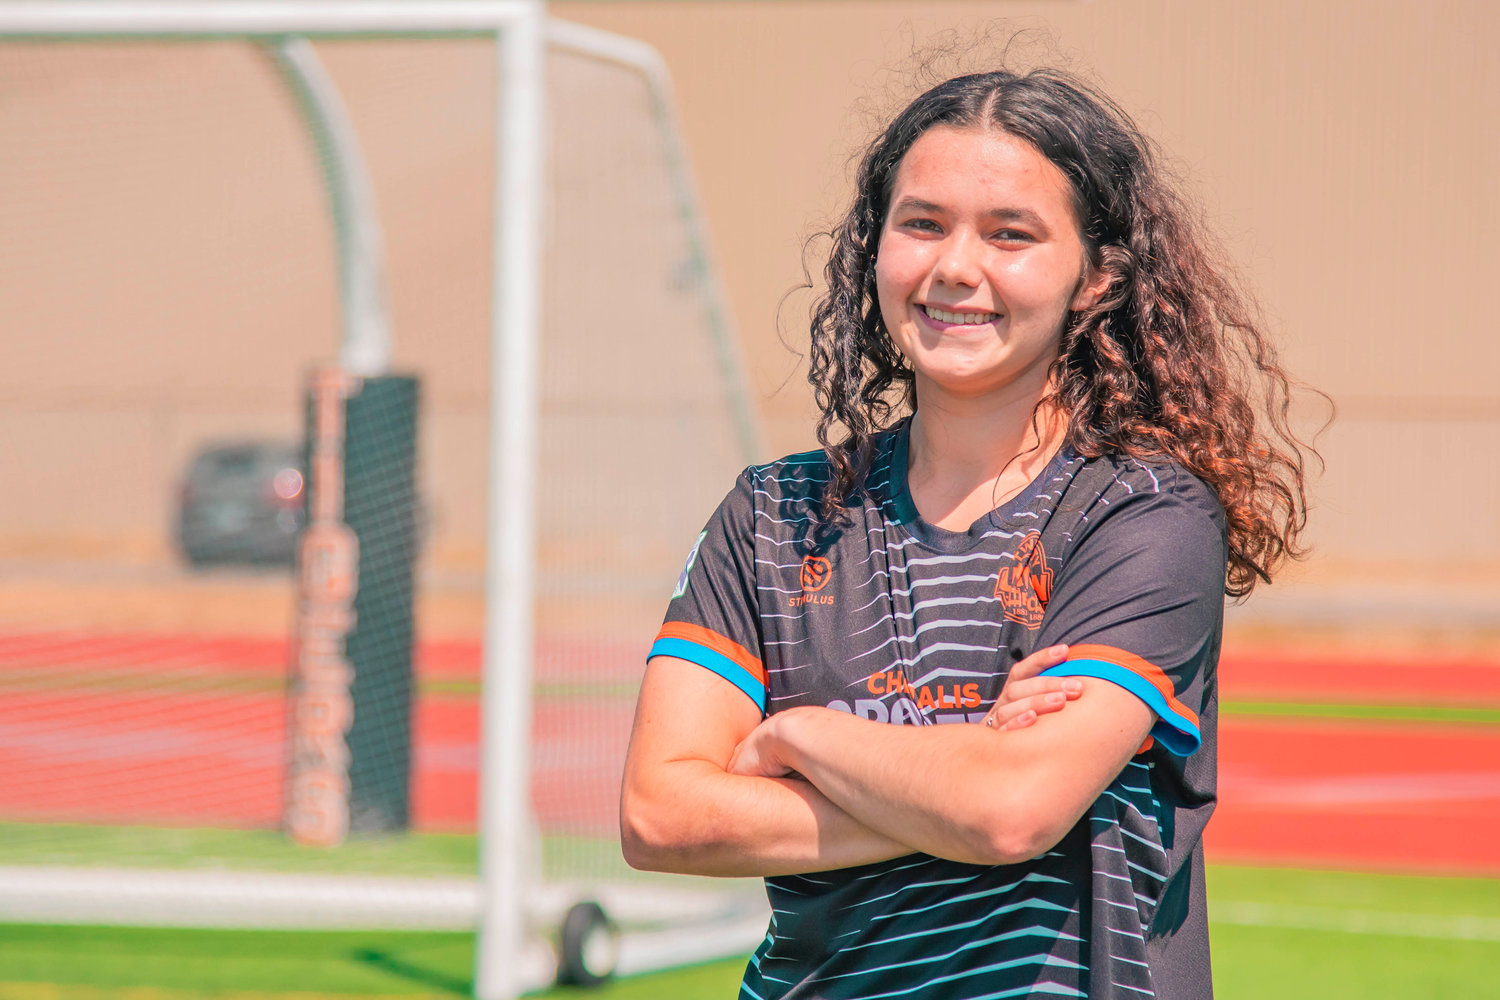 Ali Armstrong smiles and poses for a photo in front of soccer goals at Tiger Stadium in Centralia.